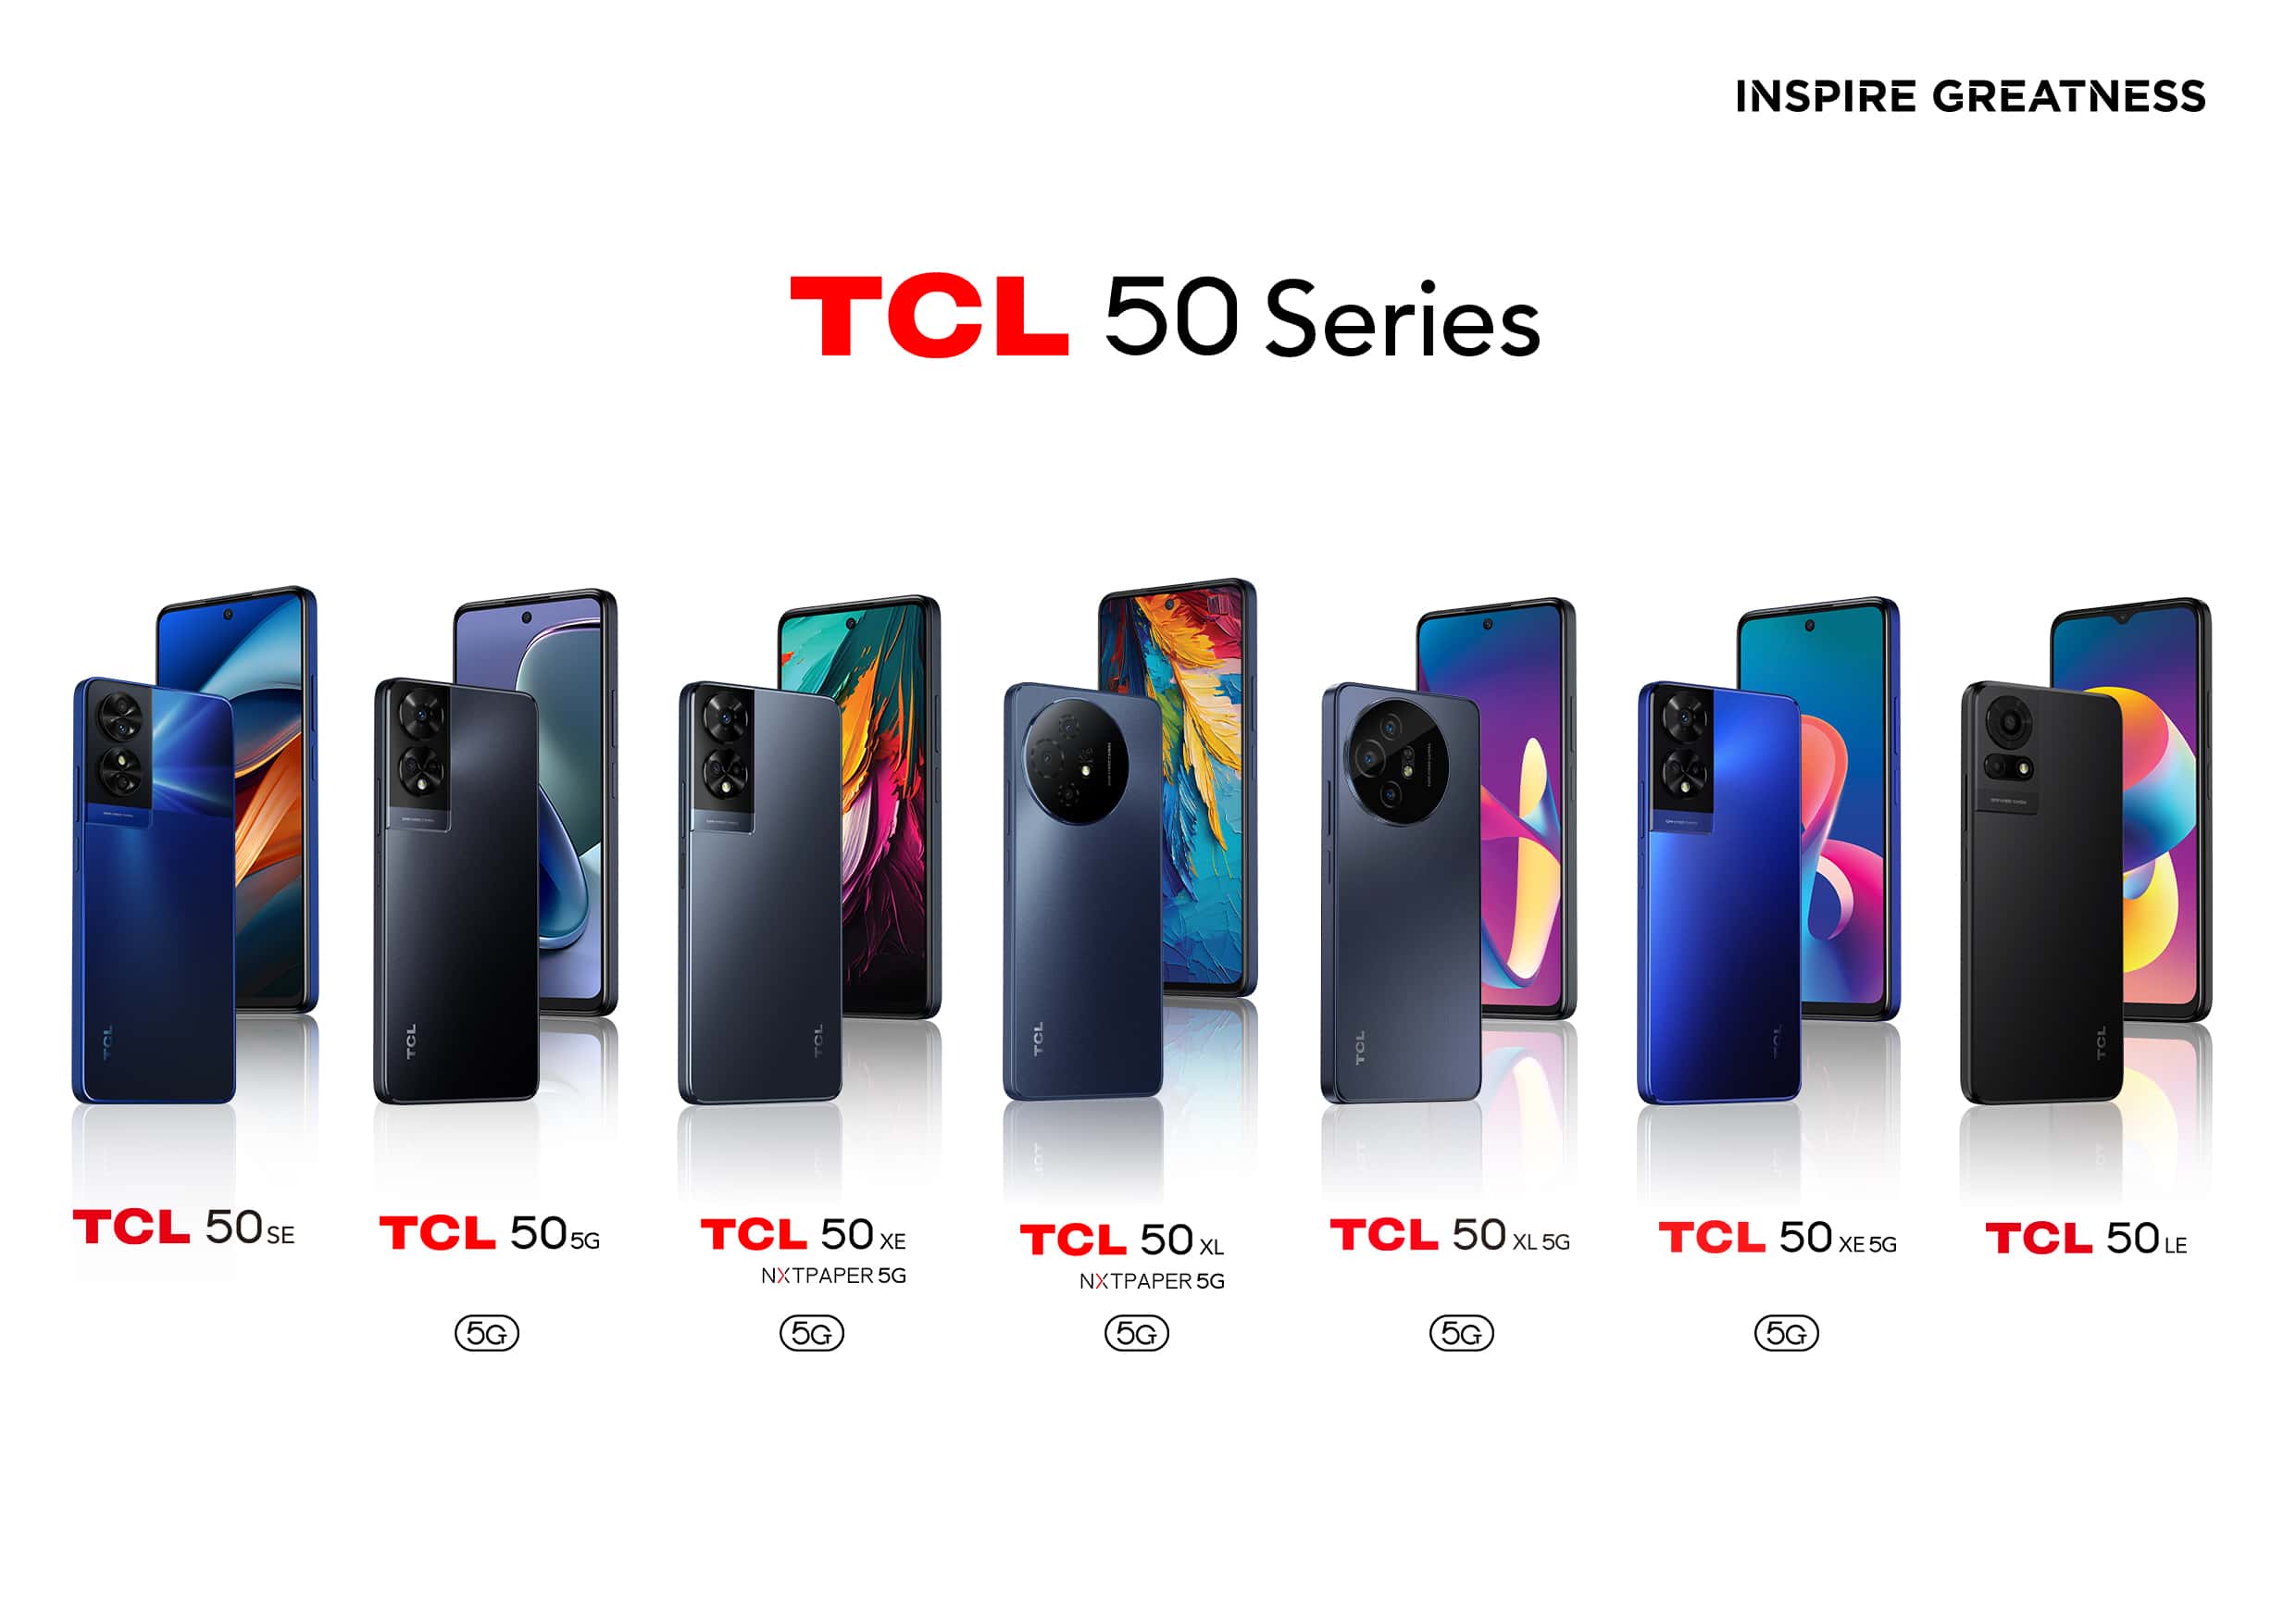 TCL 50 series family